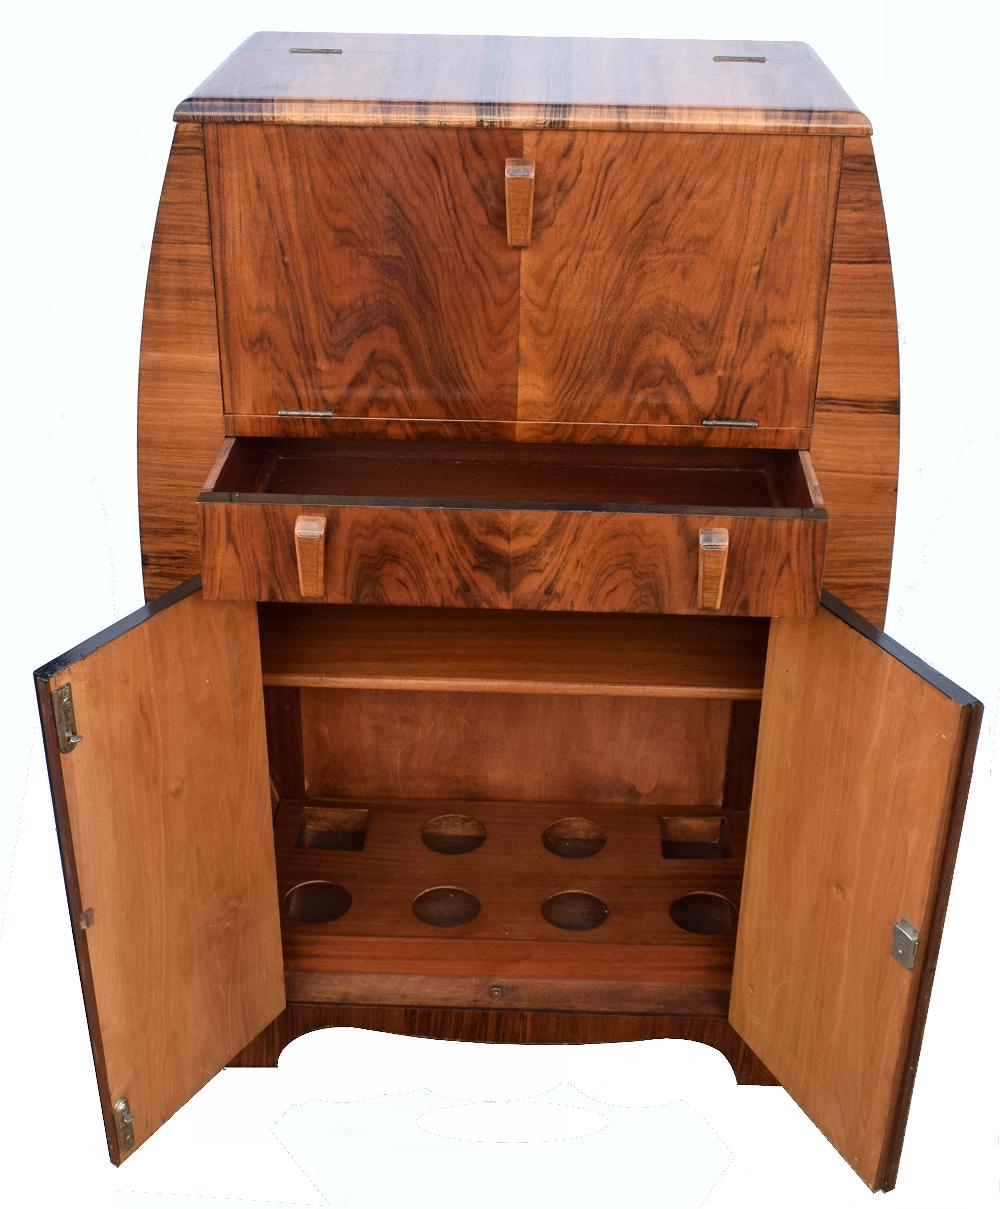 Mirror English Art Deco Fitted Burr Walnut Cocktail Cabinet or Dry Bar